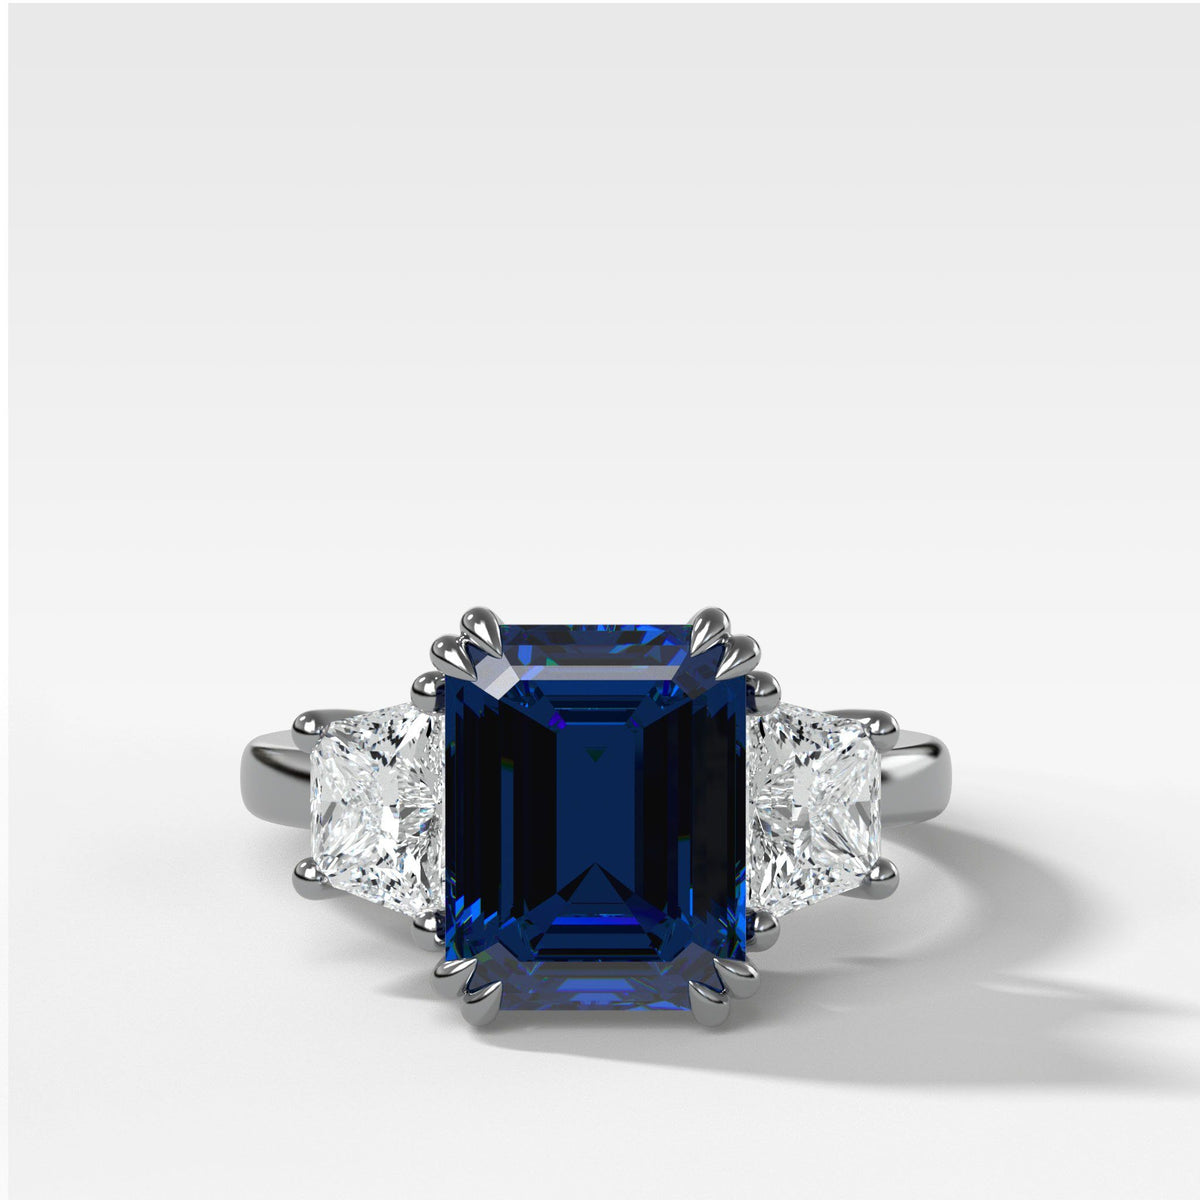 Sapphire Emerald Cut With Trapezoid Side Stone Engagement Ring by Good Stone in White Gold